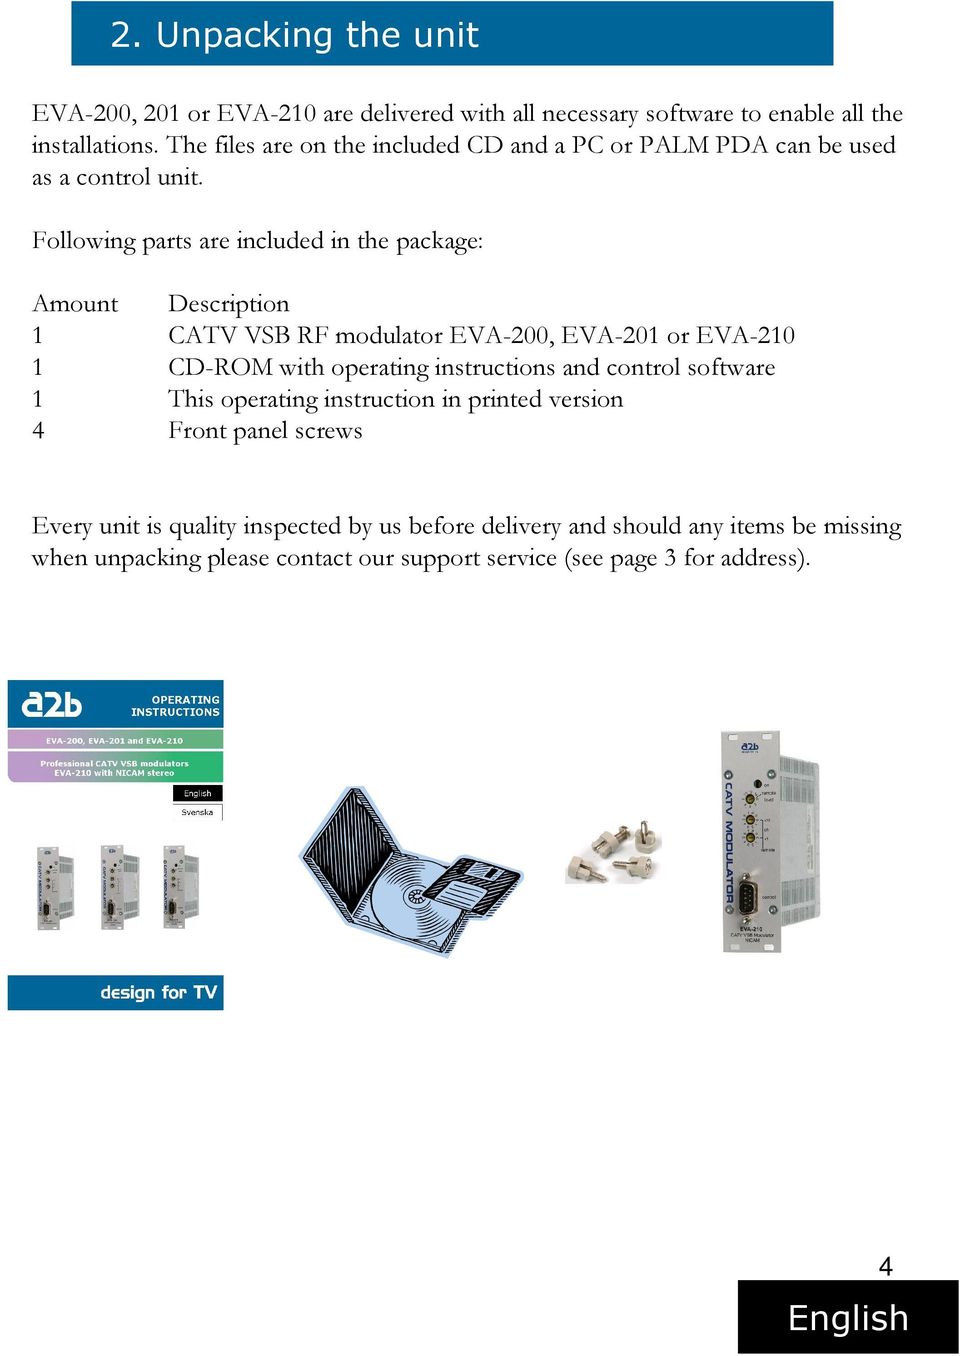 Following parts are included in the package: Amount Description 1 CATV VSB RF modulator EVA-200, EVA-201 or EVA-210 1 CD-ROM with operating instructions